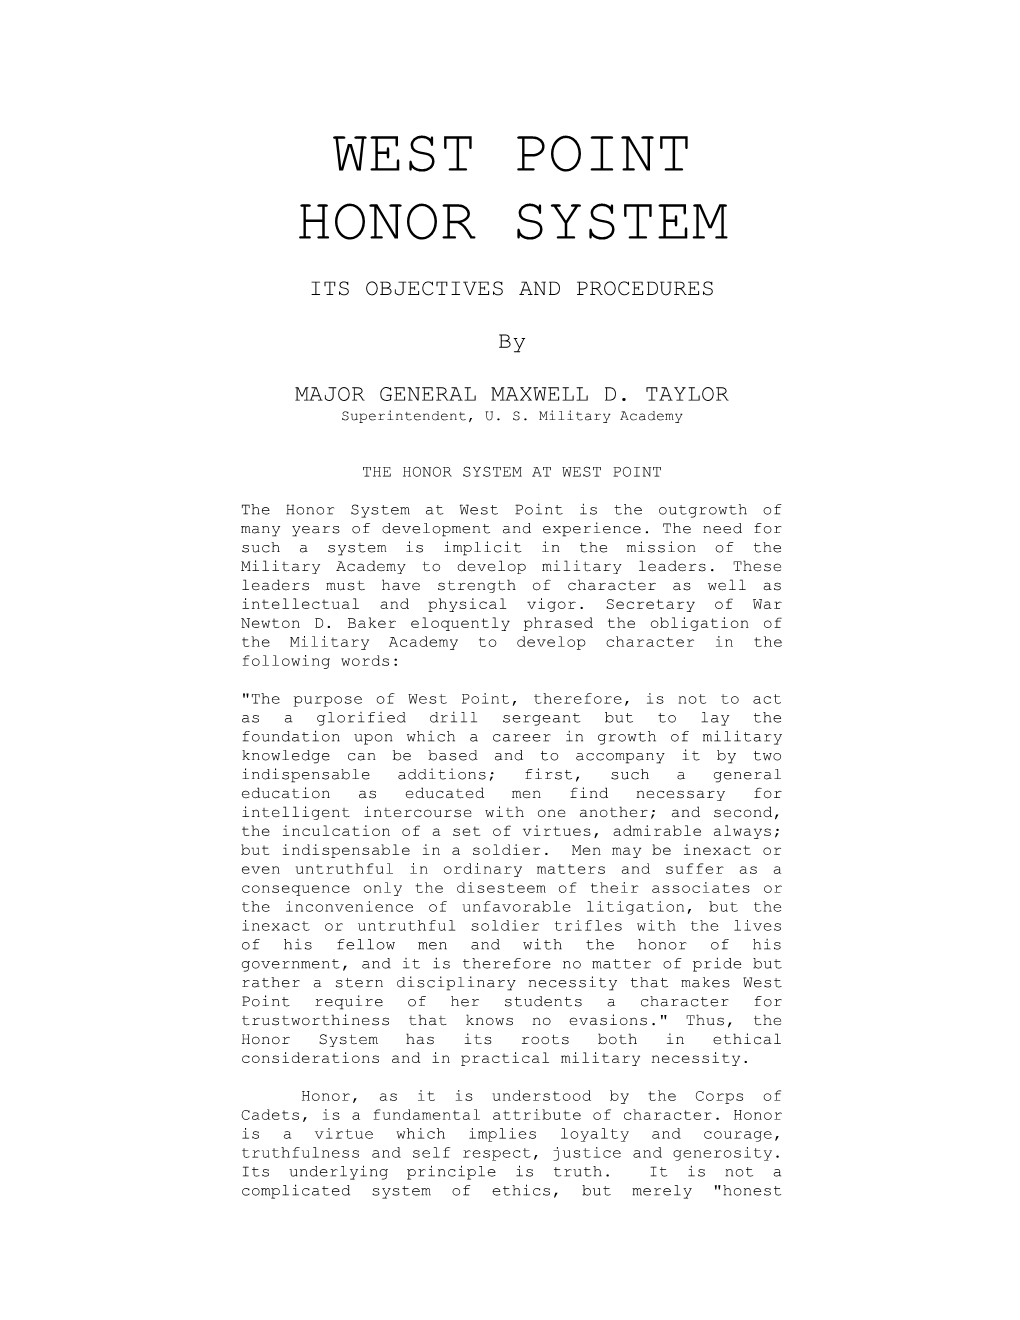 West Point Honor System